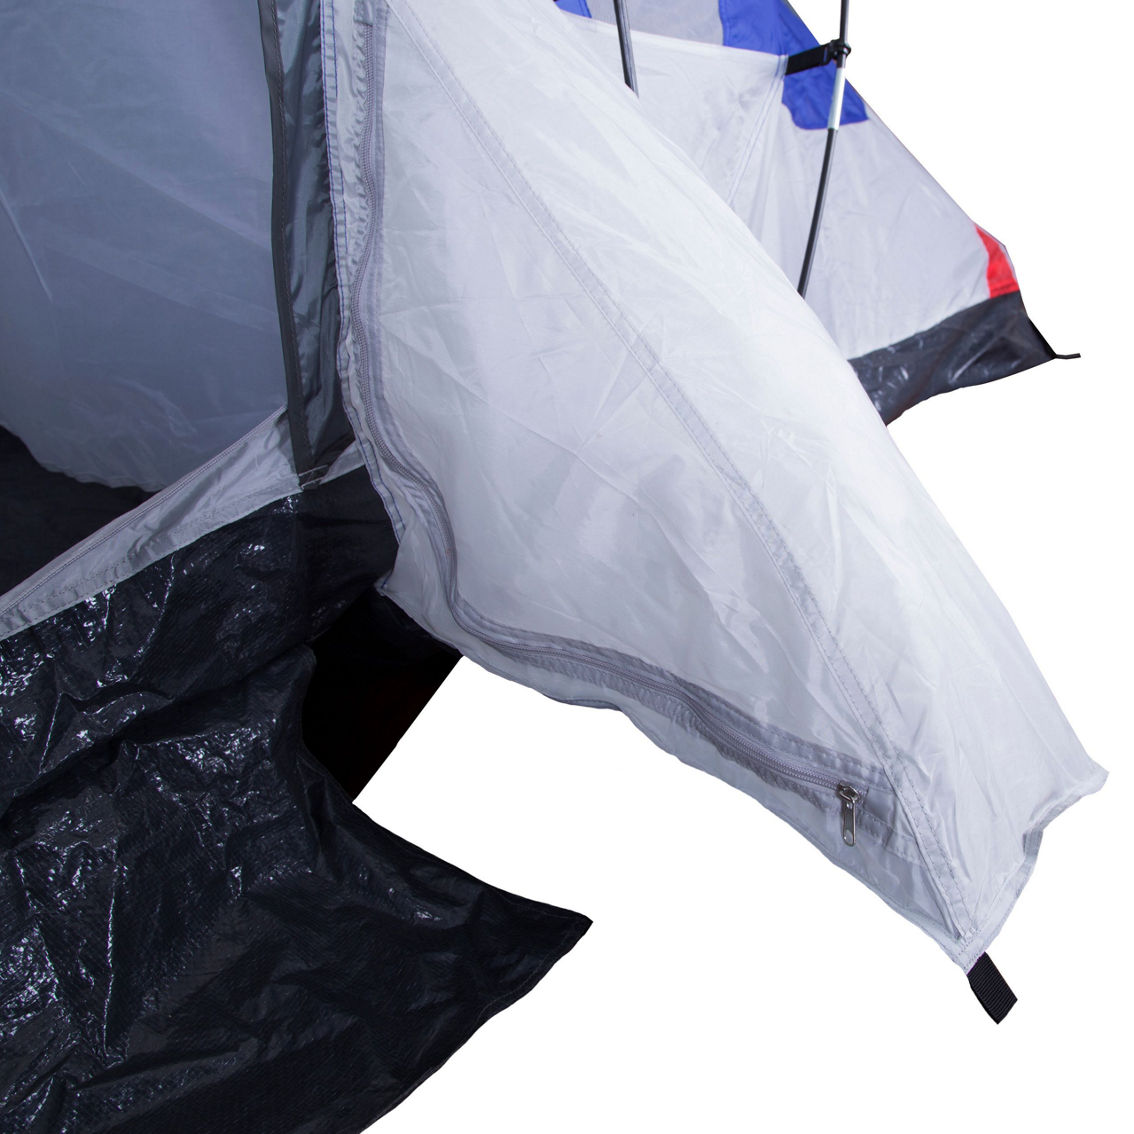 Stansport Grand 18 3-Room Family Tent - Image 5 of 5